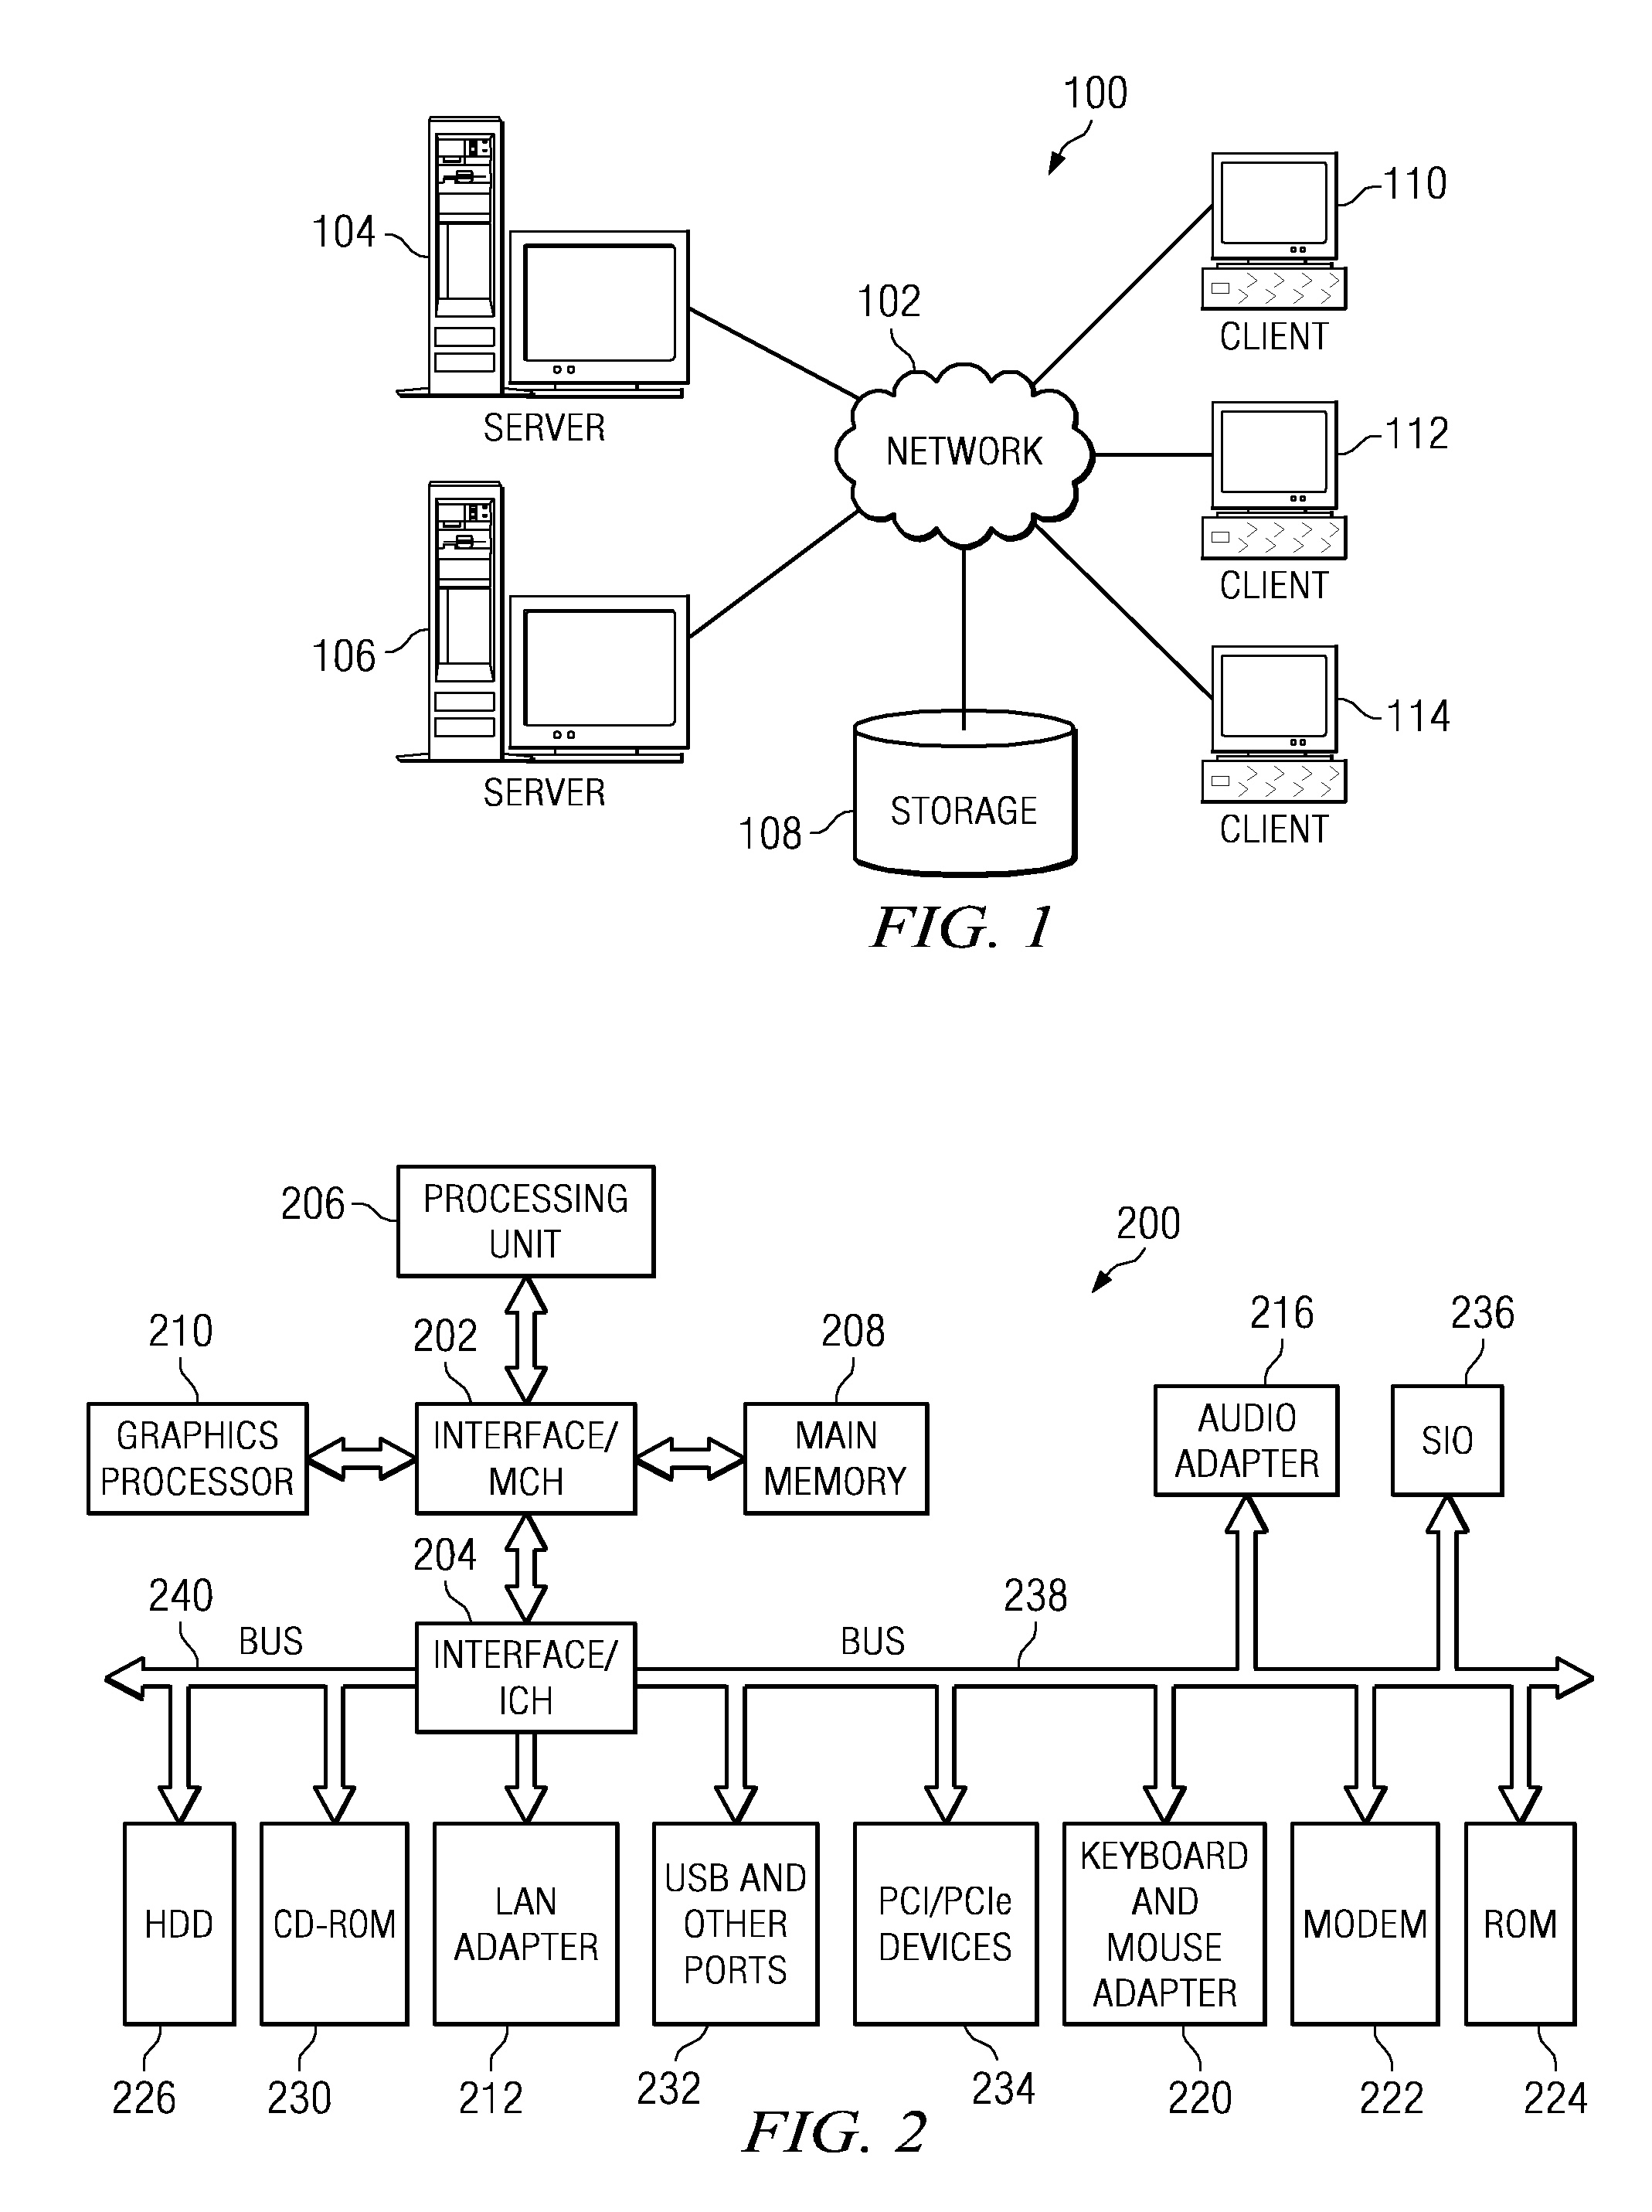 Dynamic update of contact information and speed dial settings based on a virtual world interaction